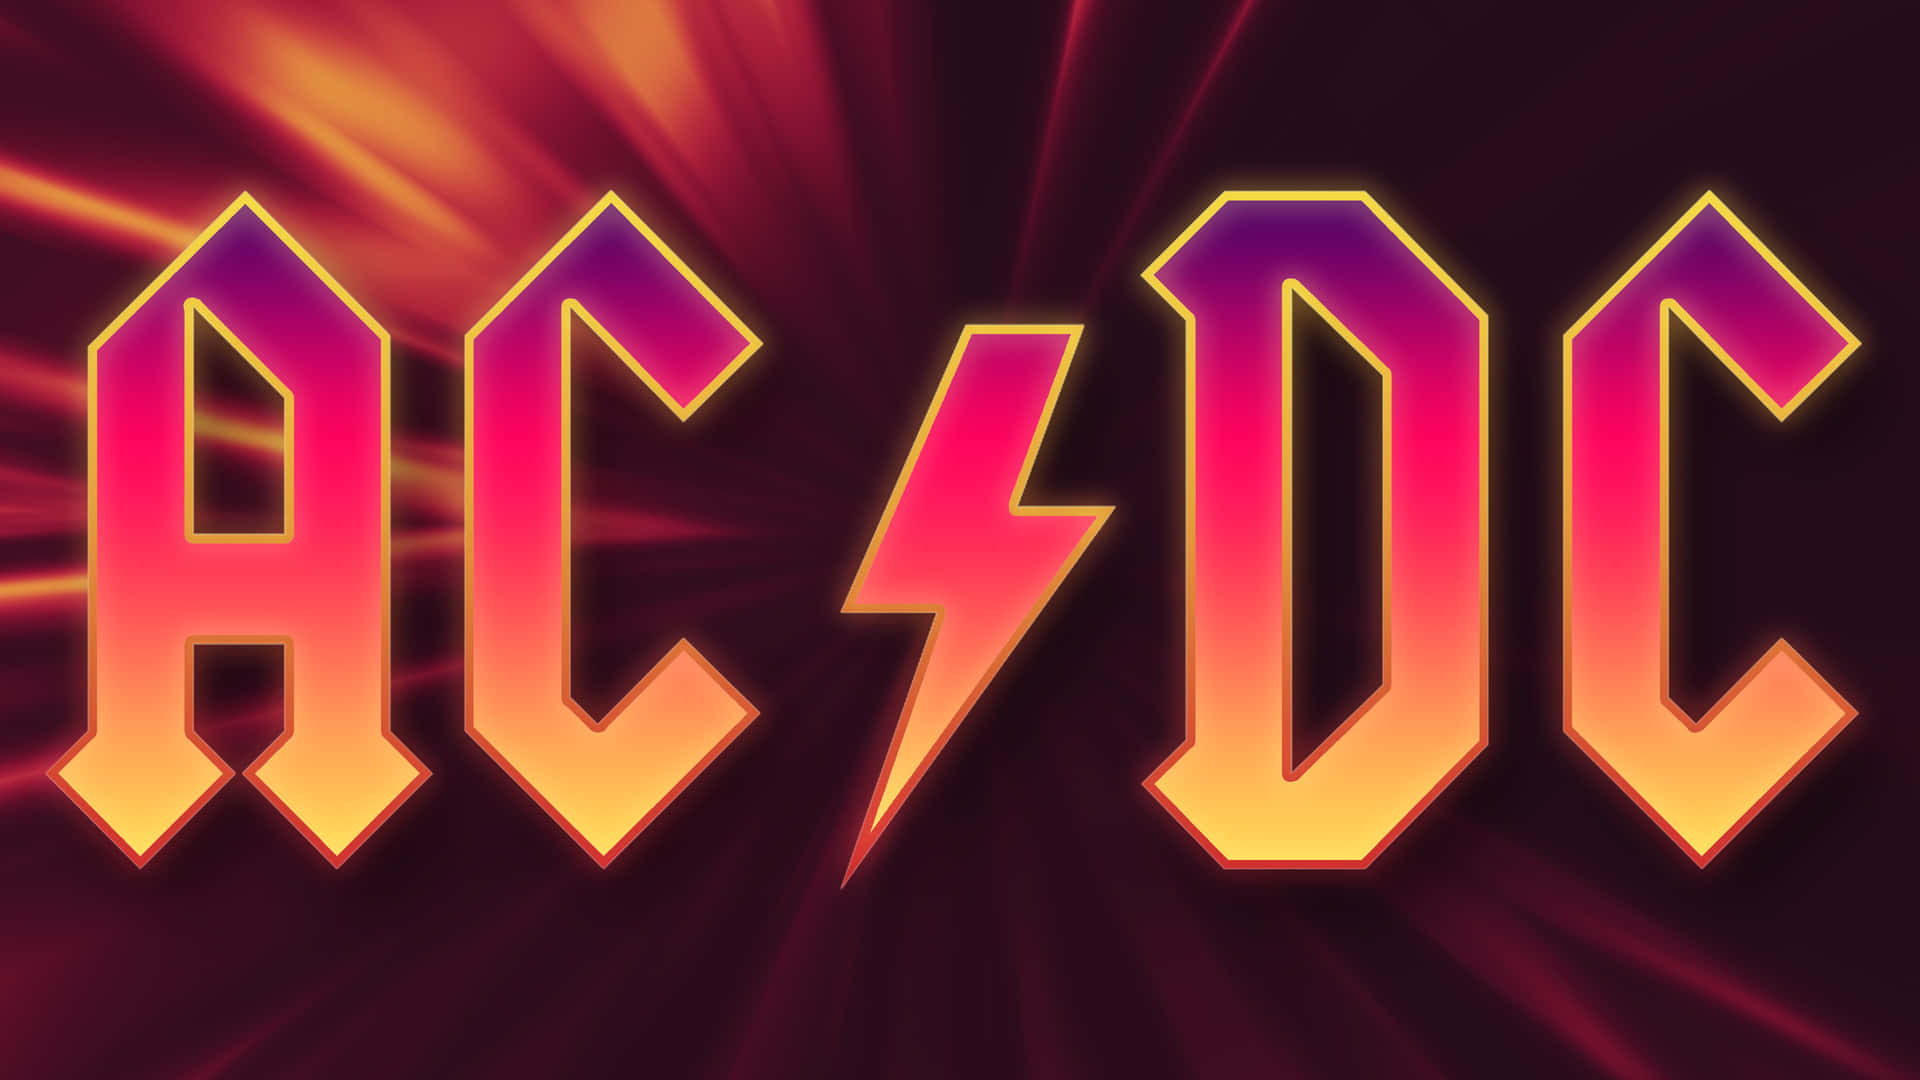 ACDC Wallpaper by CrowSix on DeviantArt